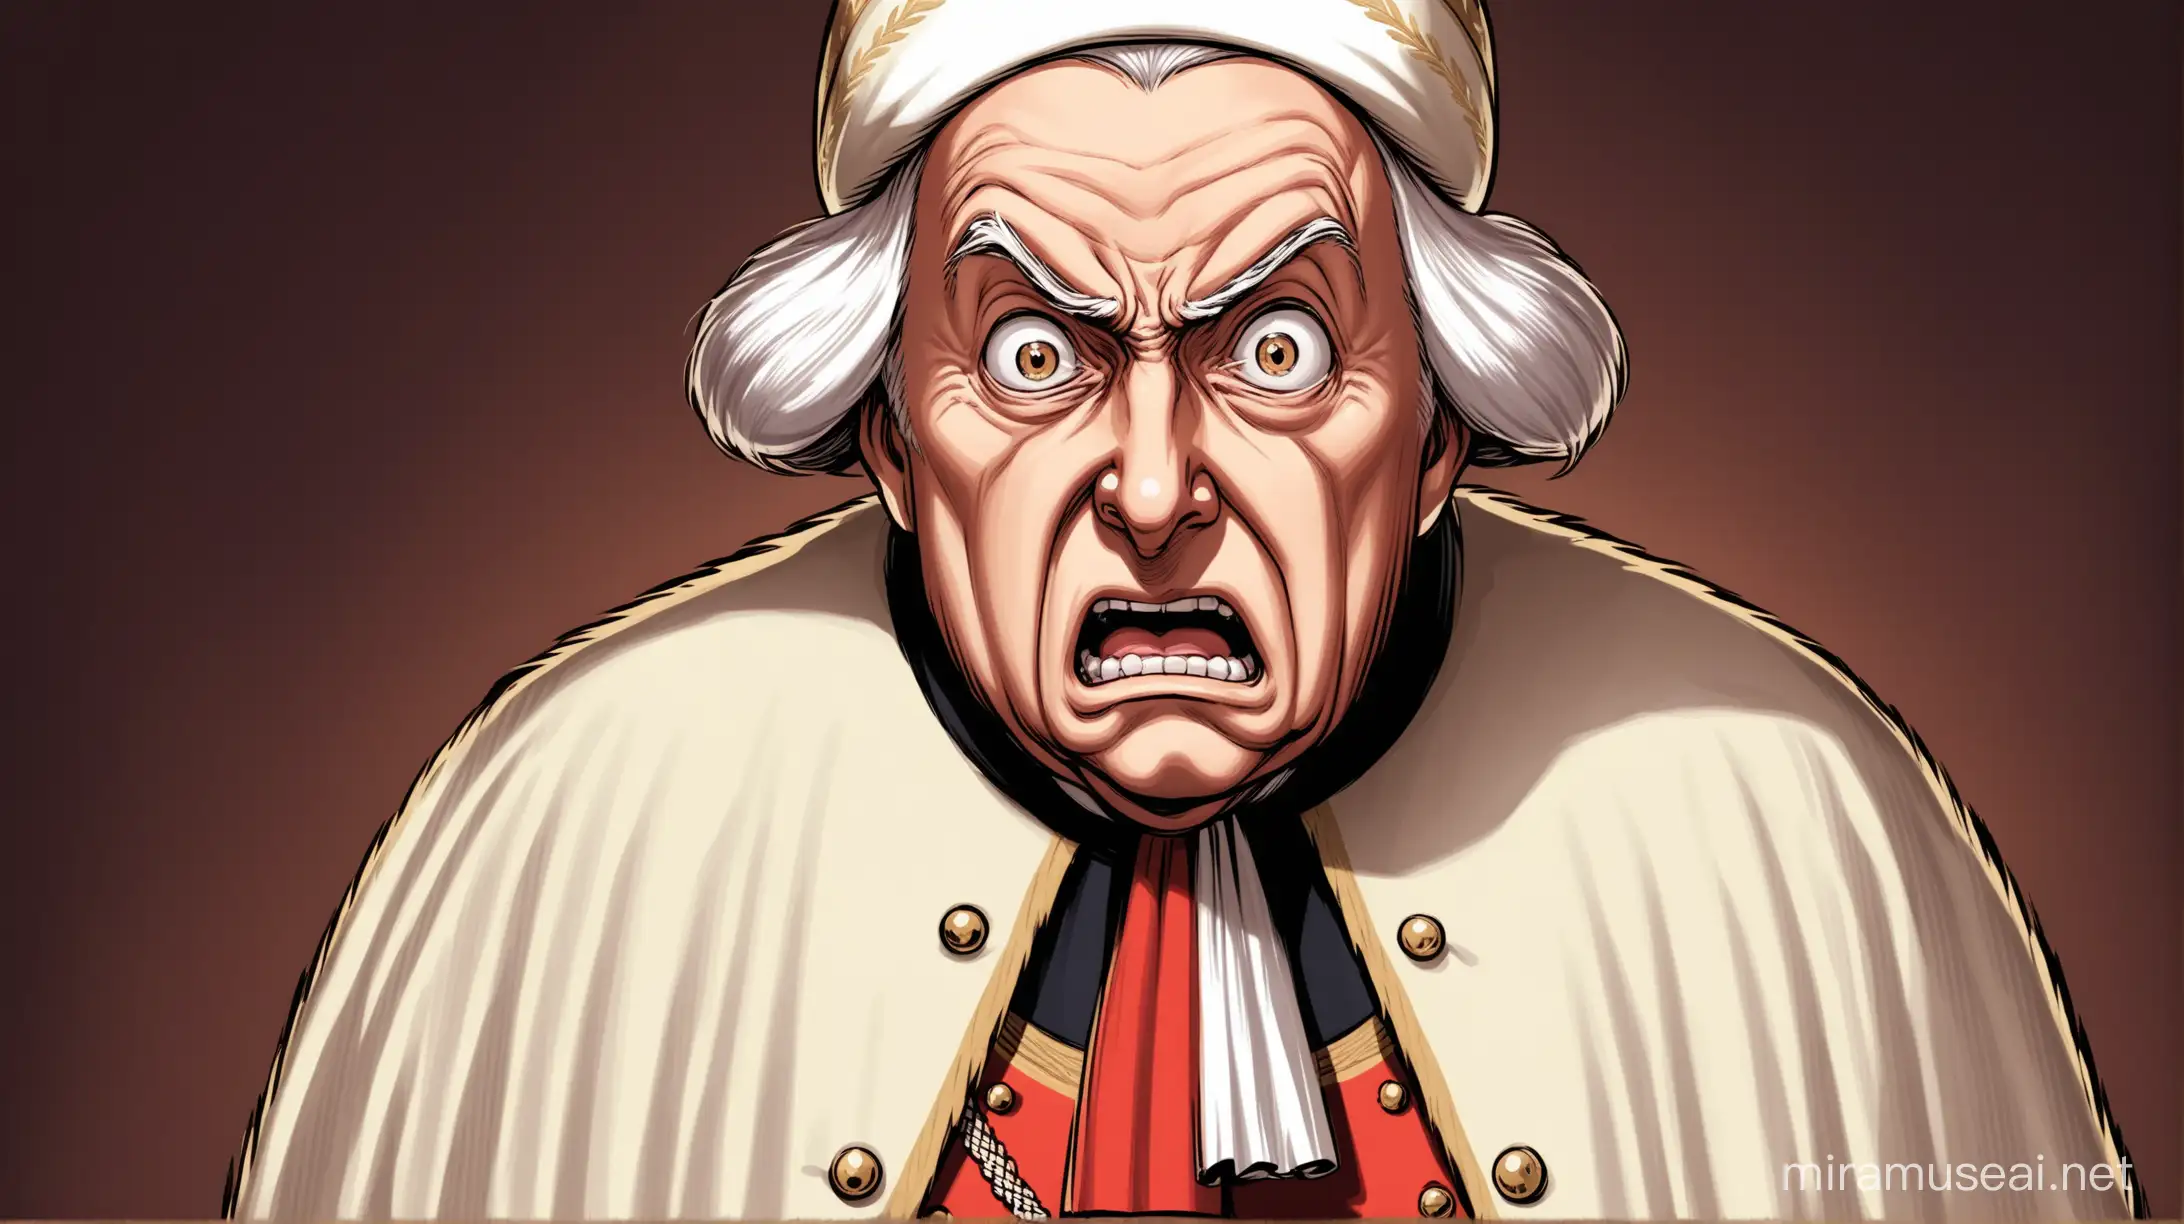 Colonial British Ruler with a Worried Expression